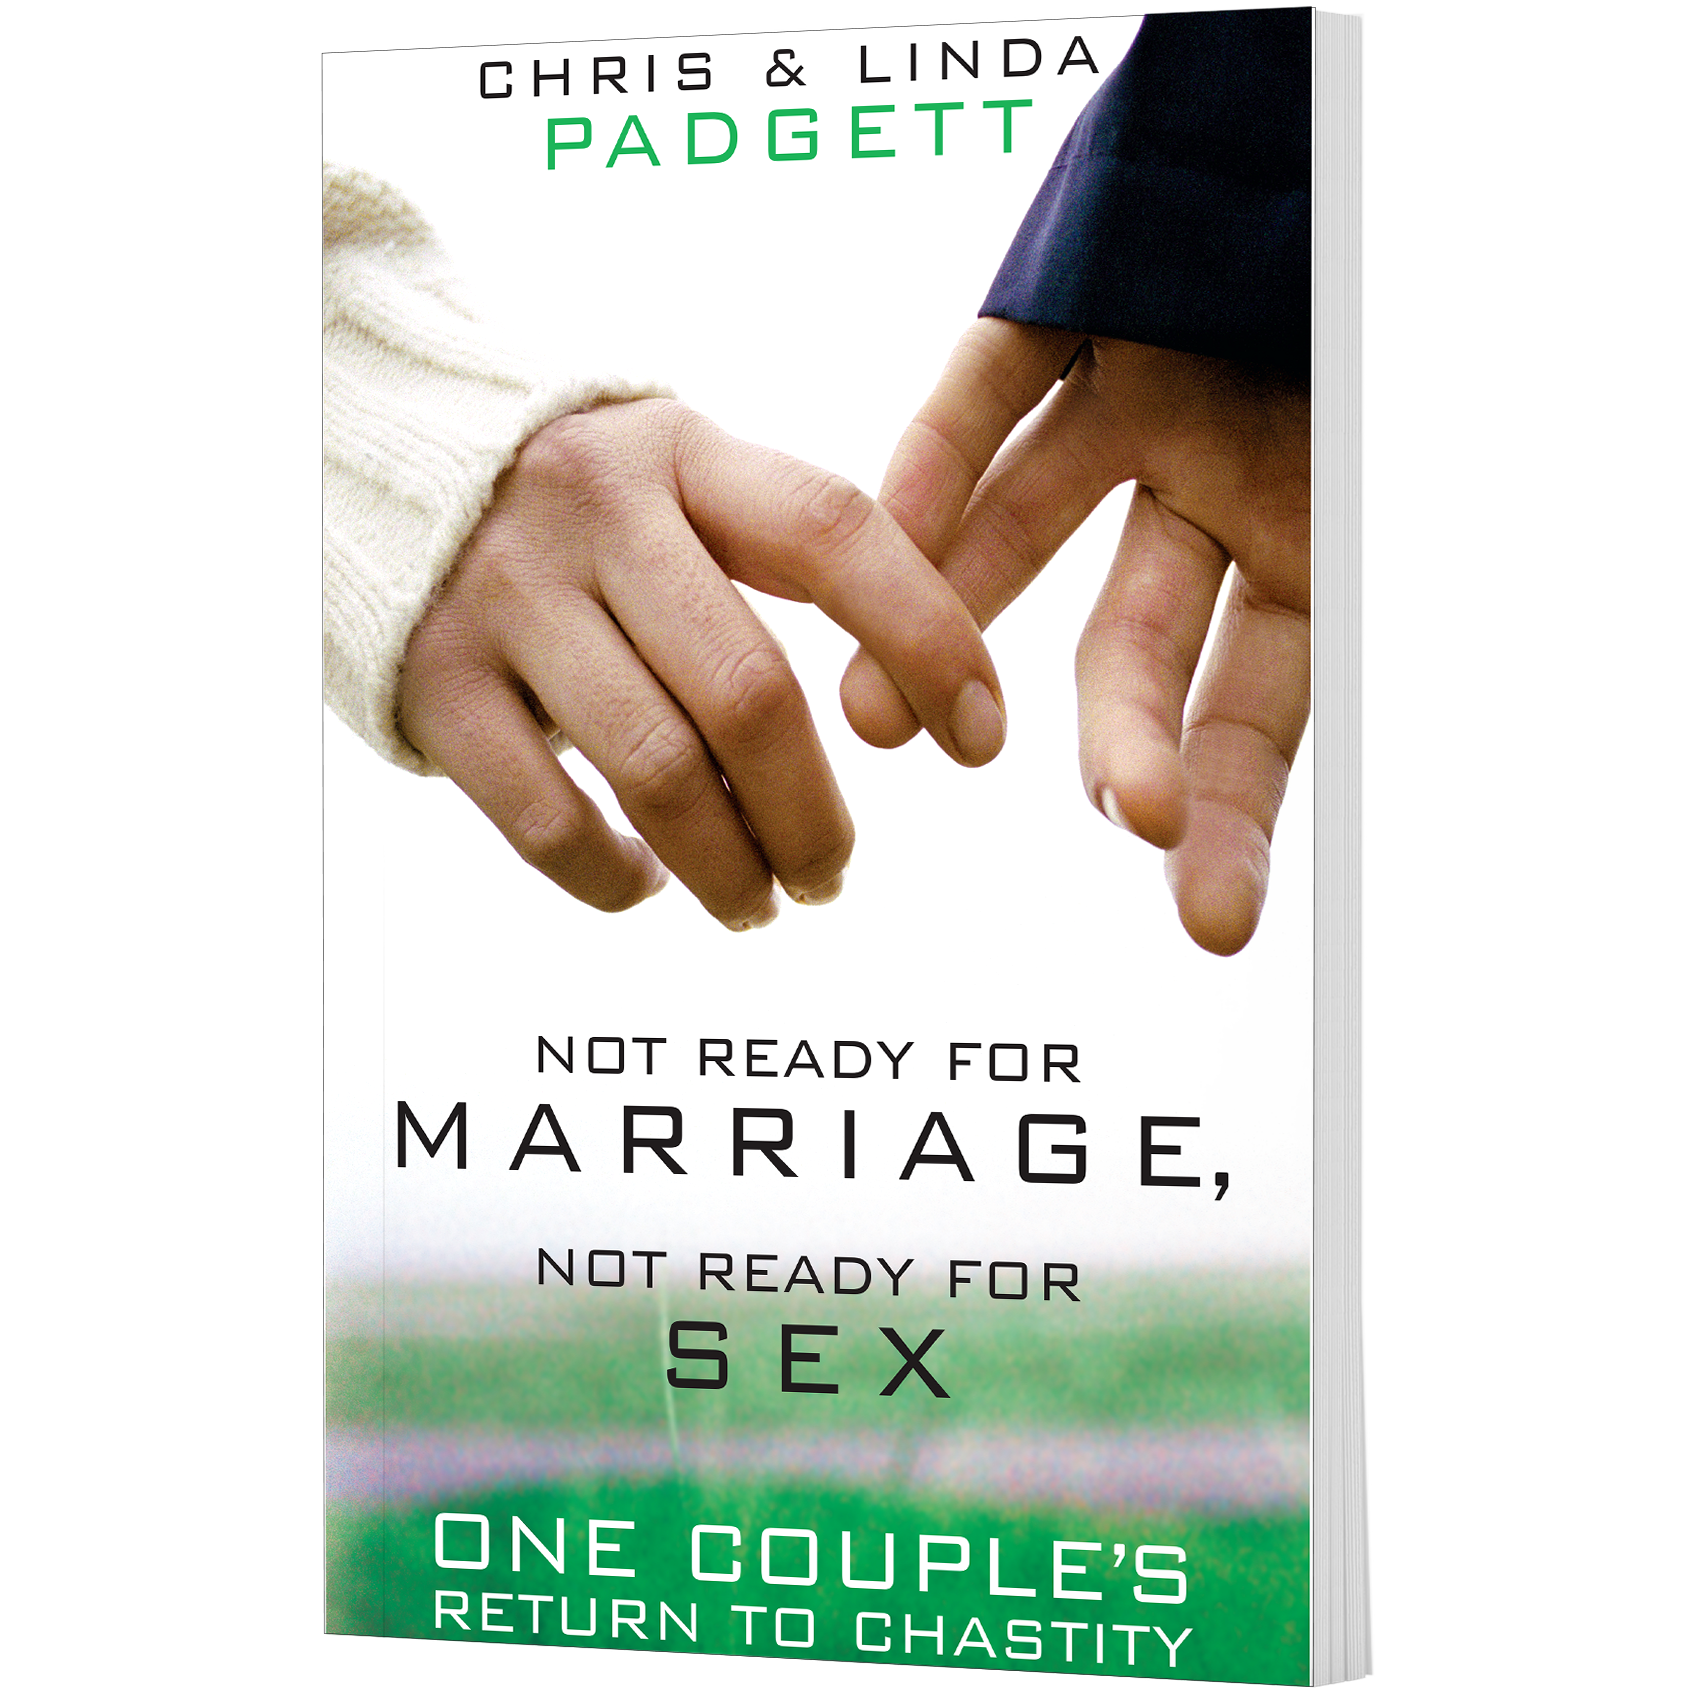 Buy Not Ready for Marriage, Not Ready for Sex Dynamic Catholic pic